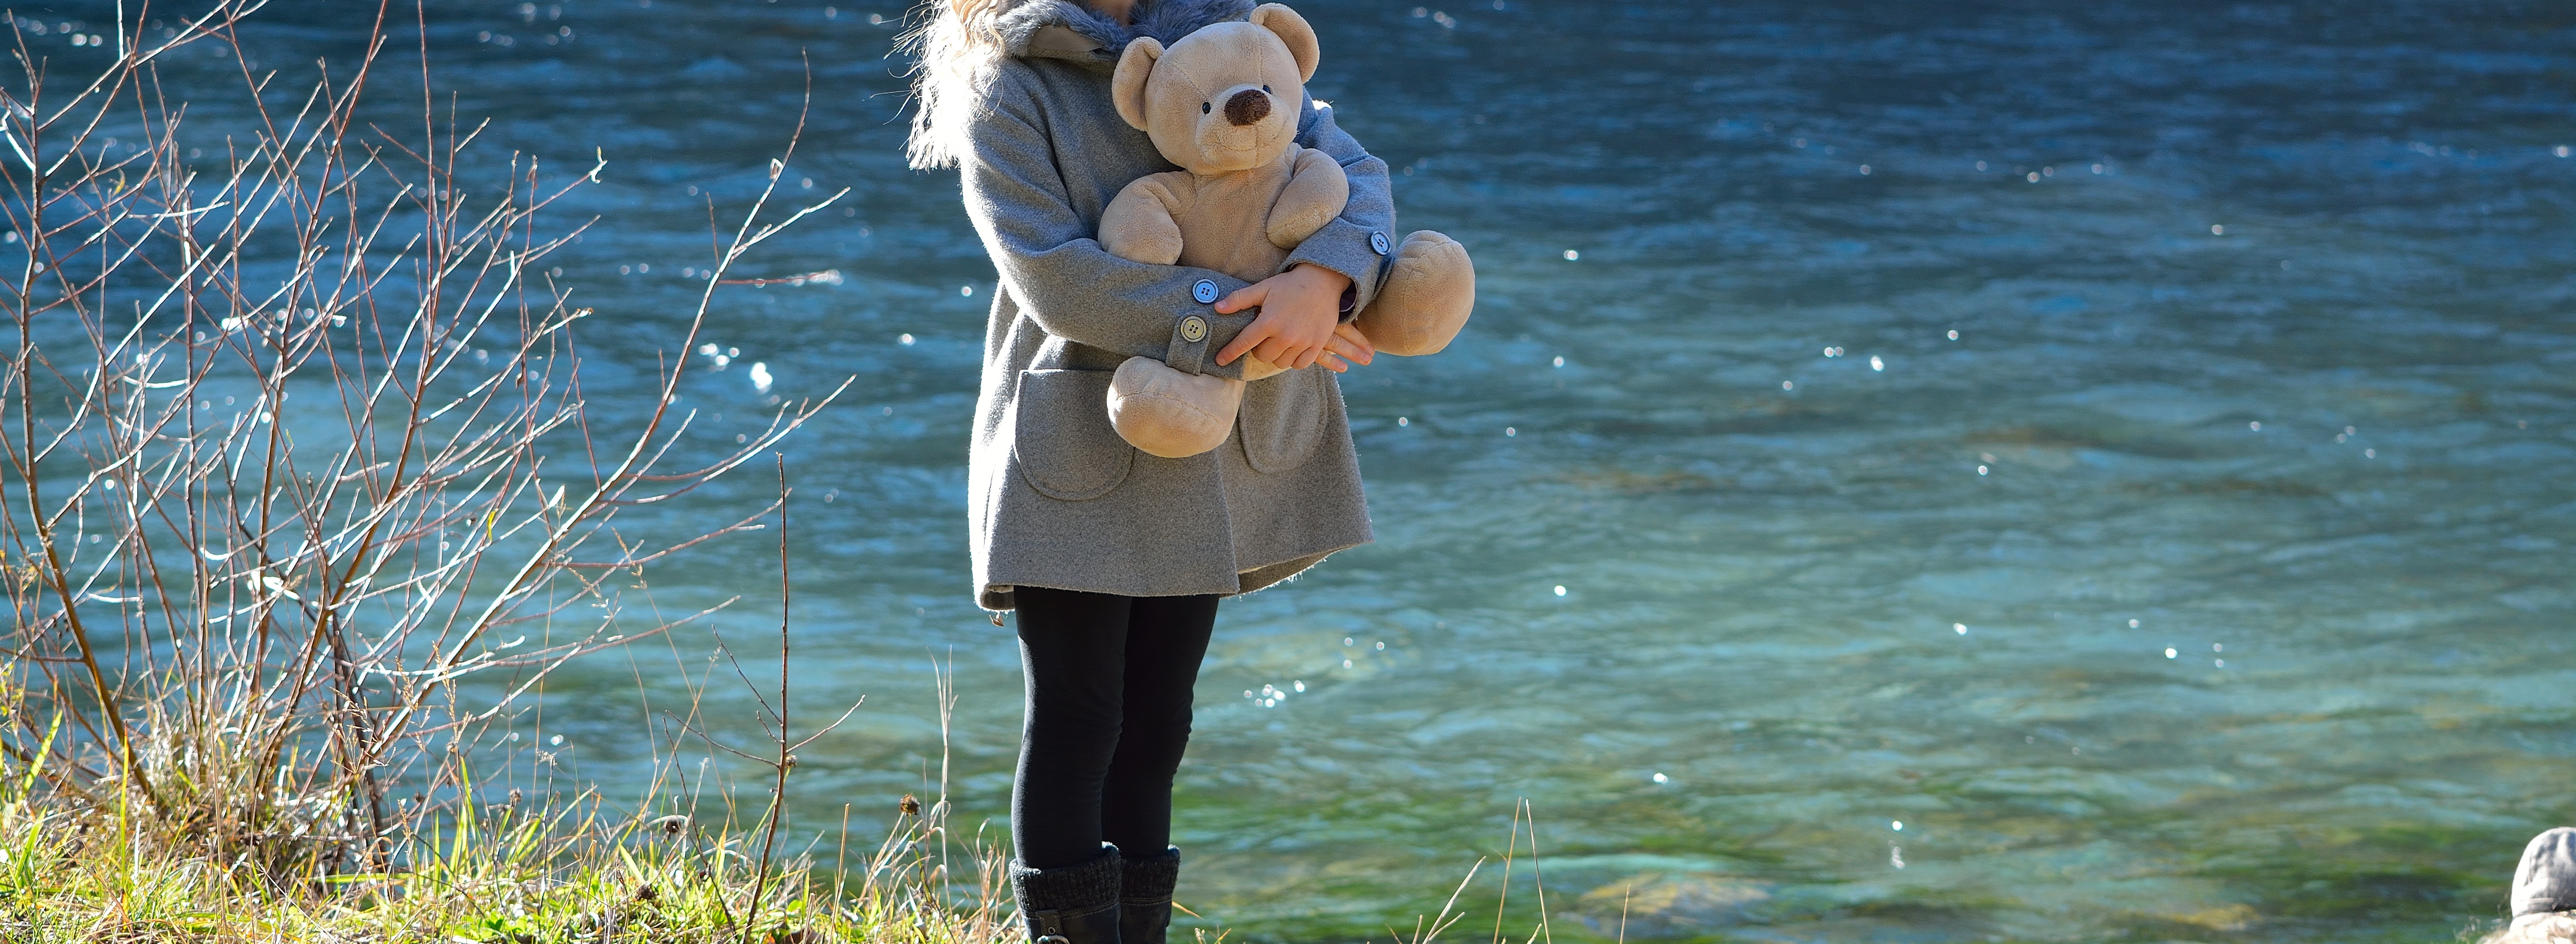 Girl with the bear photo